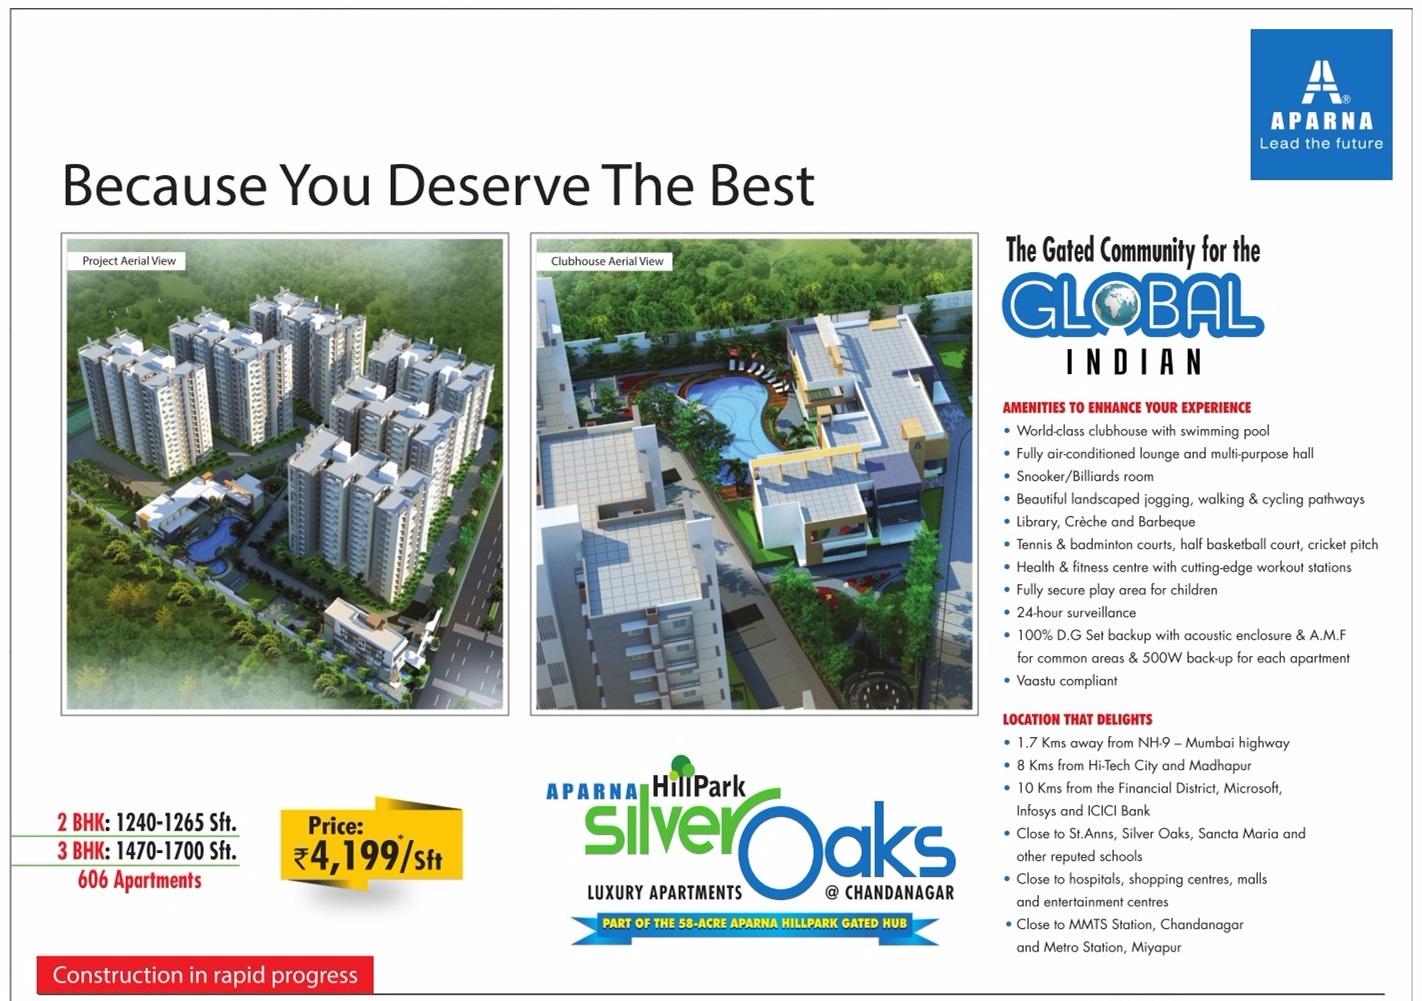 The gated community for global Indian at Aparna Silver Oaks in Hyderabad Update